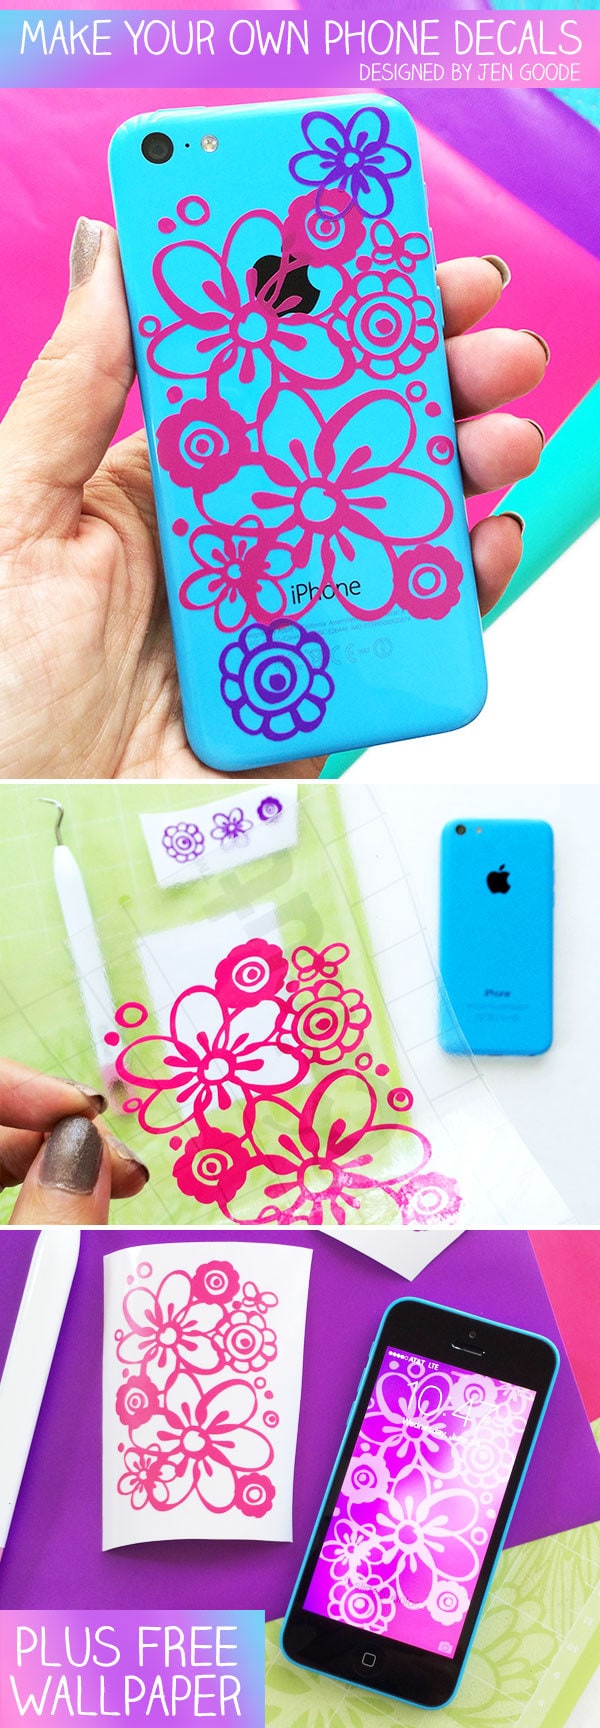 Make your own iPhone decal with Cricut and art by Jen Goode